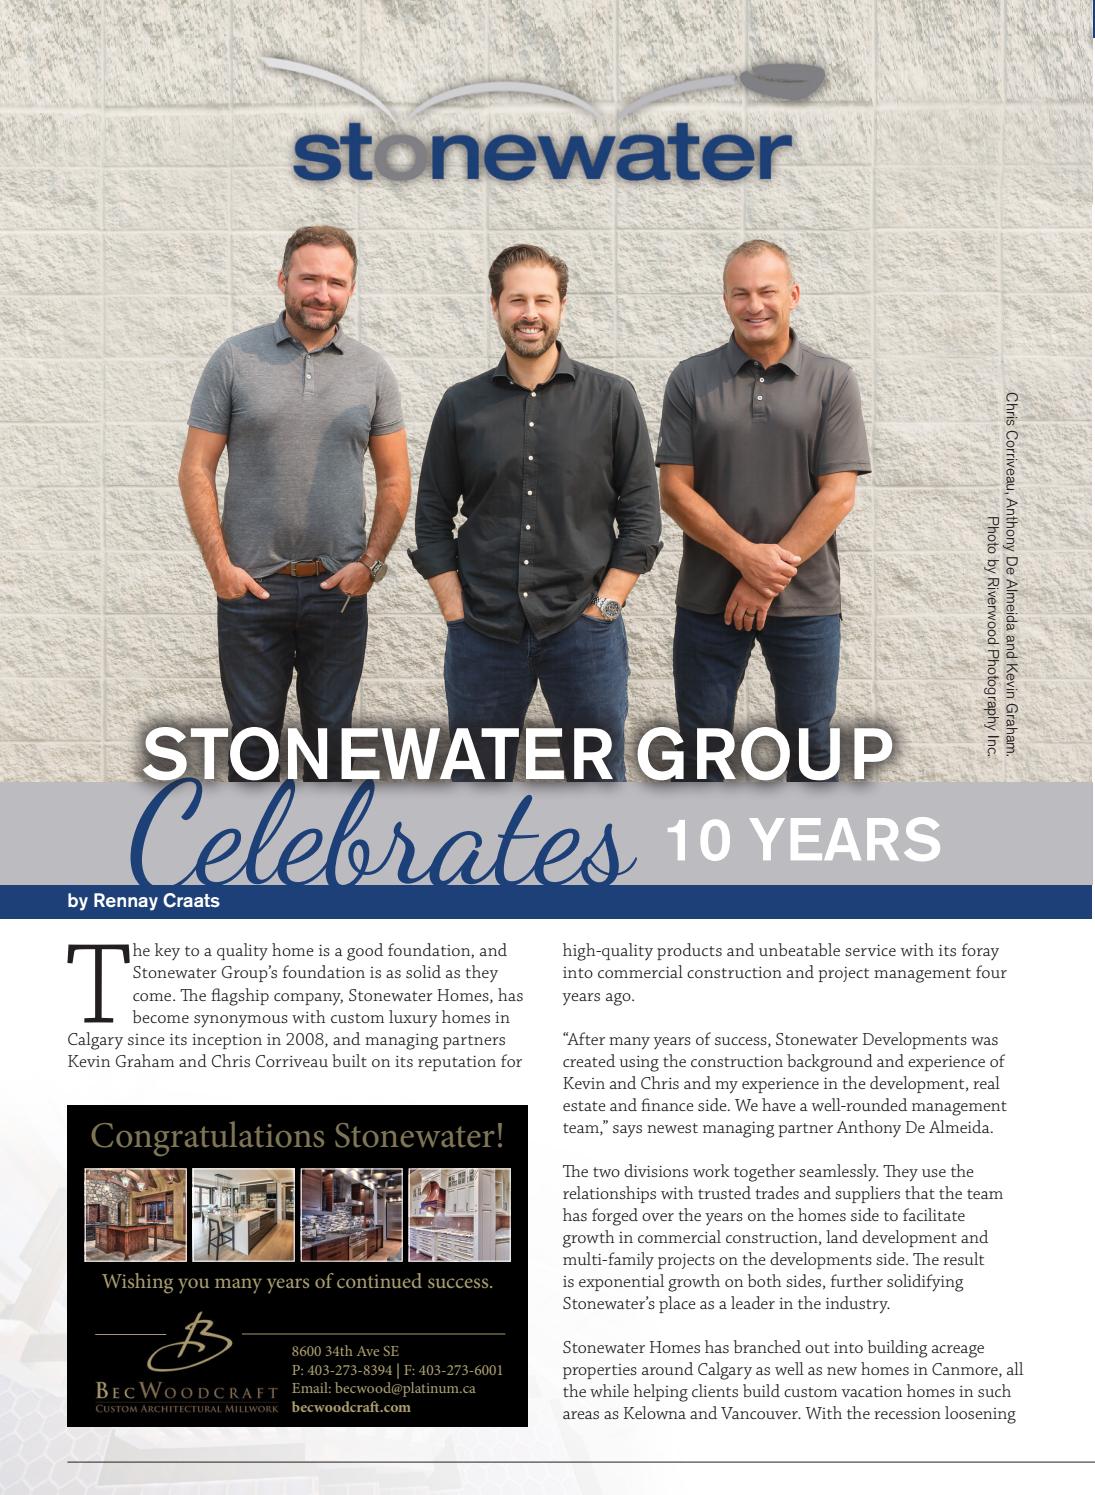 Business in Calgary Magazine - Business Profile for Stonewater Homes